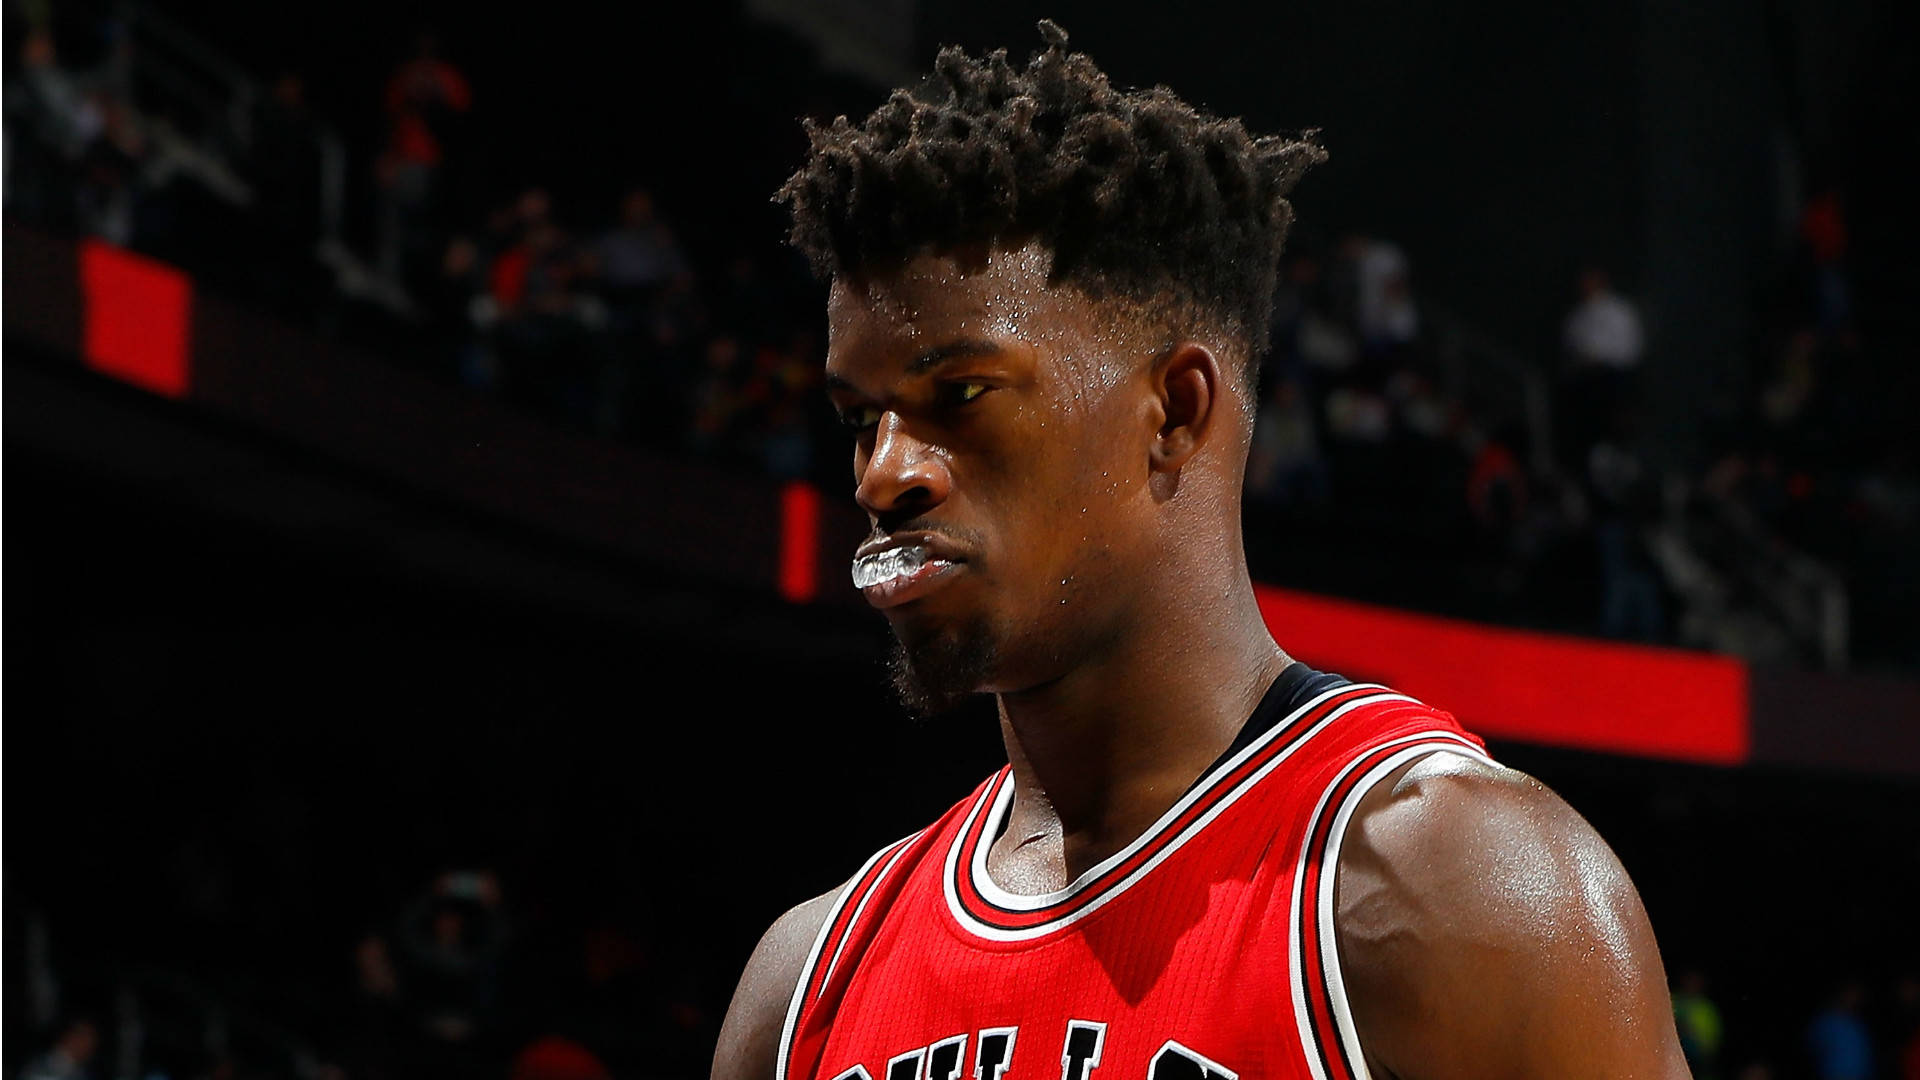 Free Jimmy Butler Wallpaper Downloads, [100+] Jimmy Butler Wallpapers for  FREE 